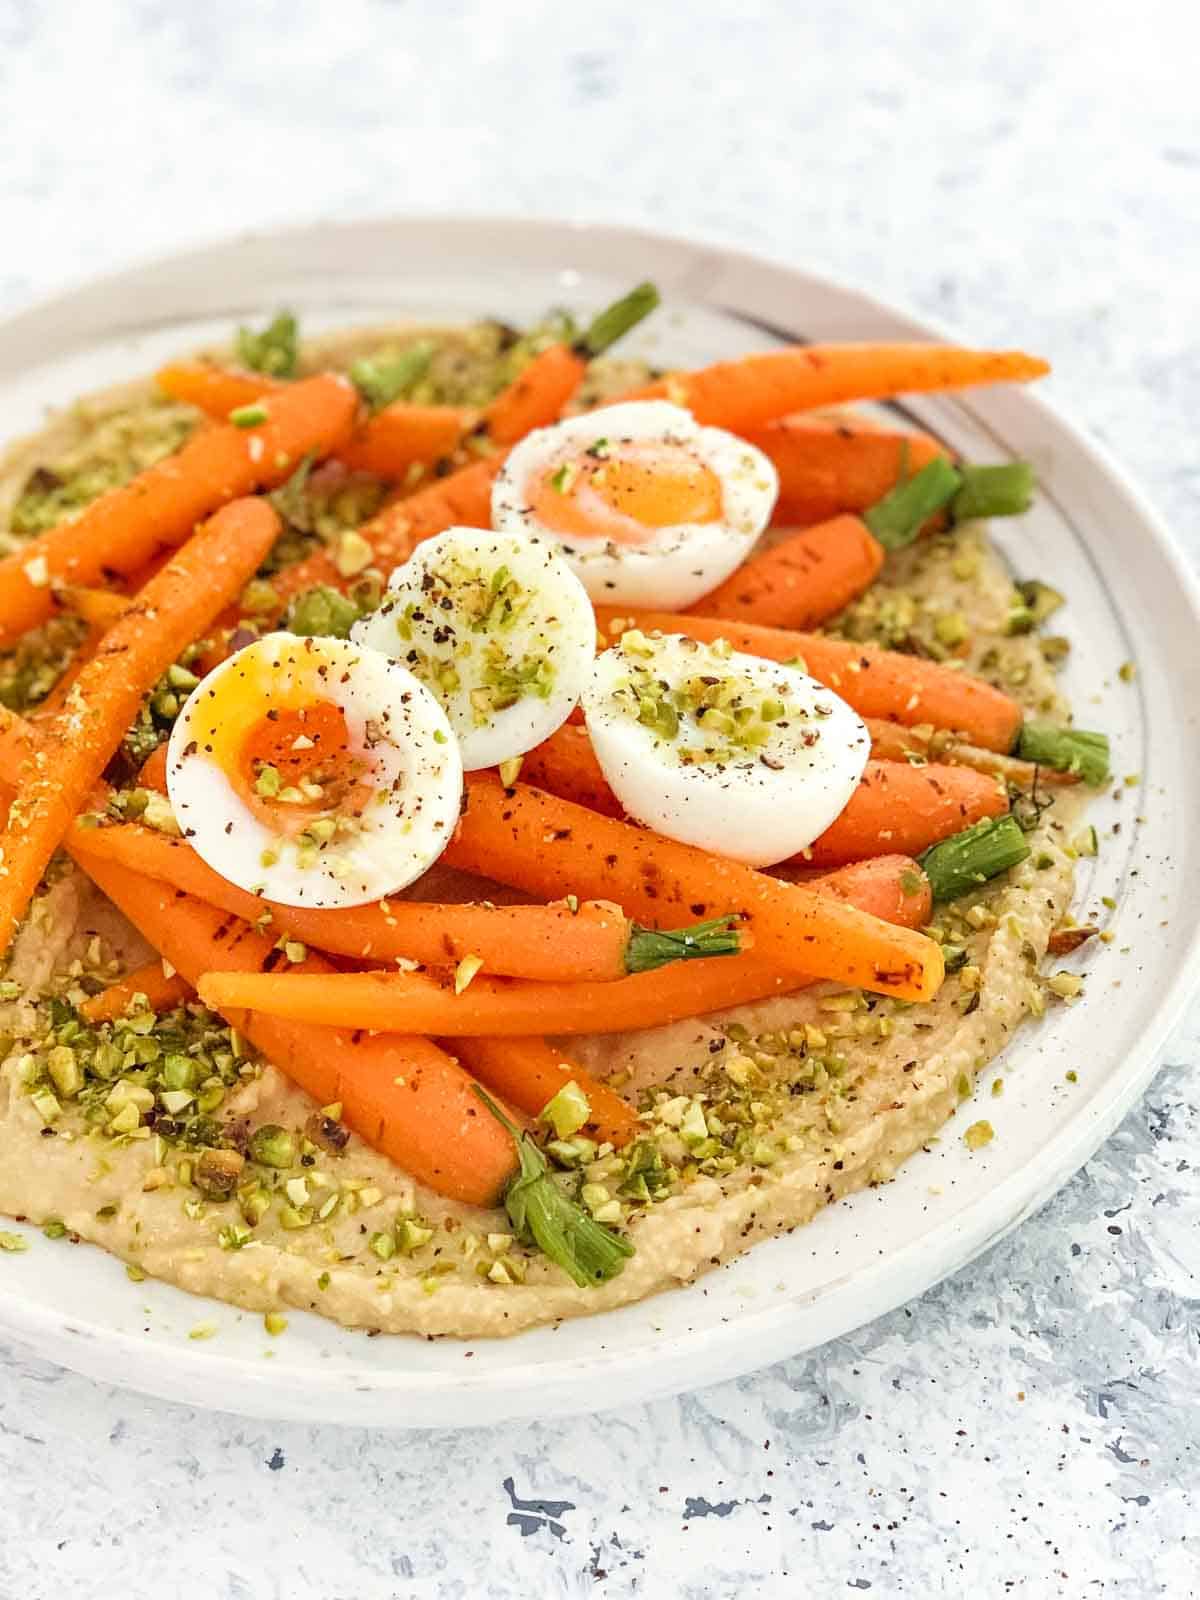 Salad of Dutch Carrots, Hummus and Soft-Boiled Eggs